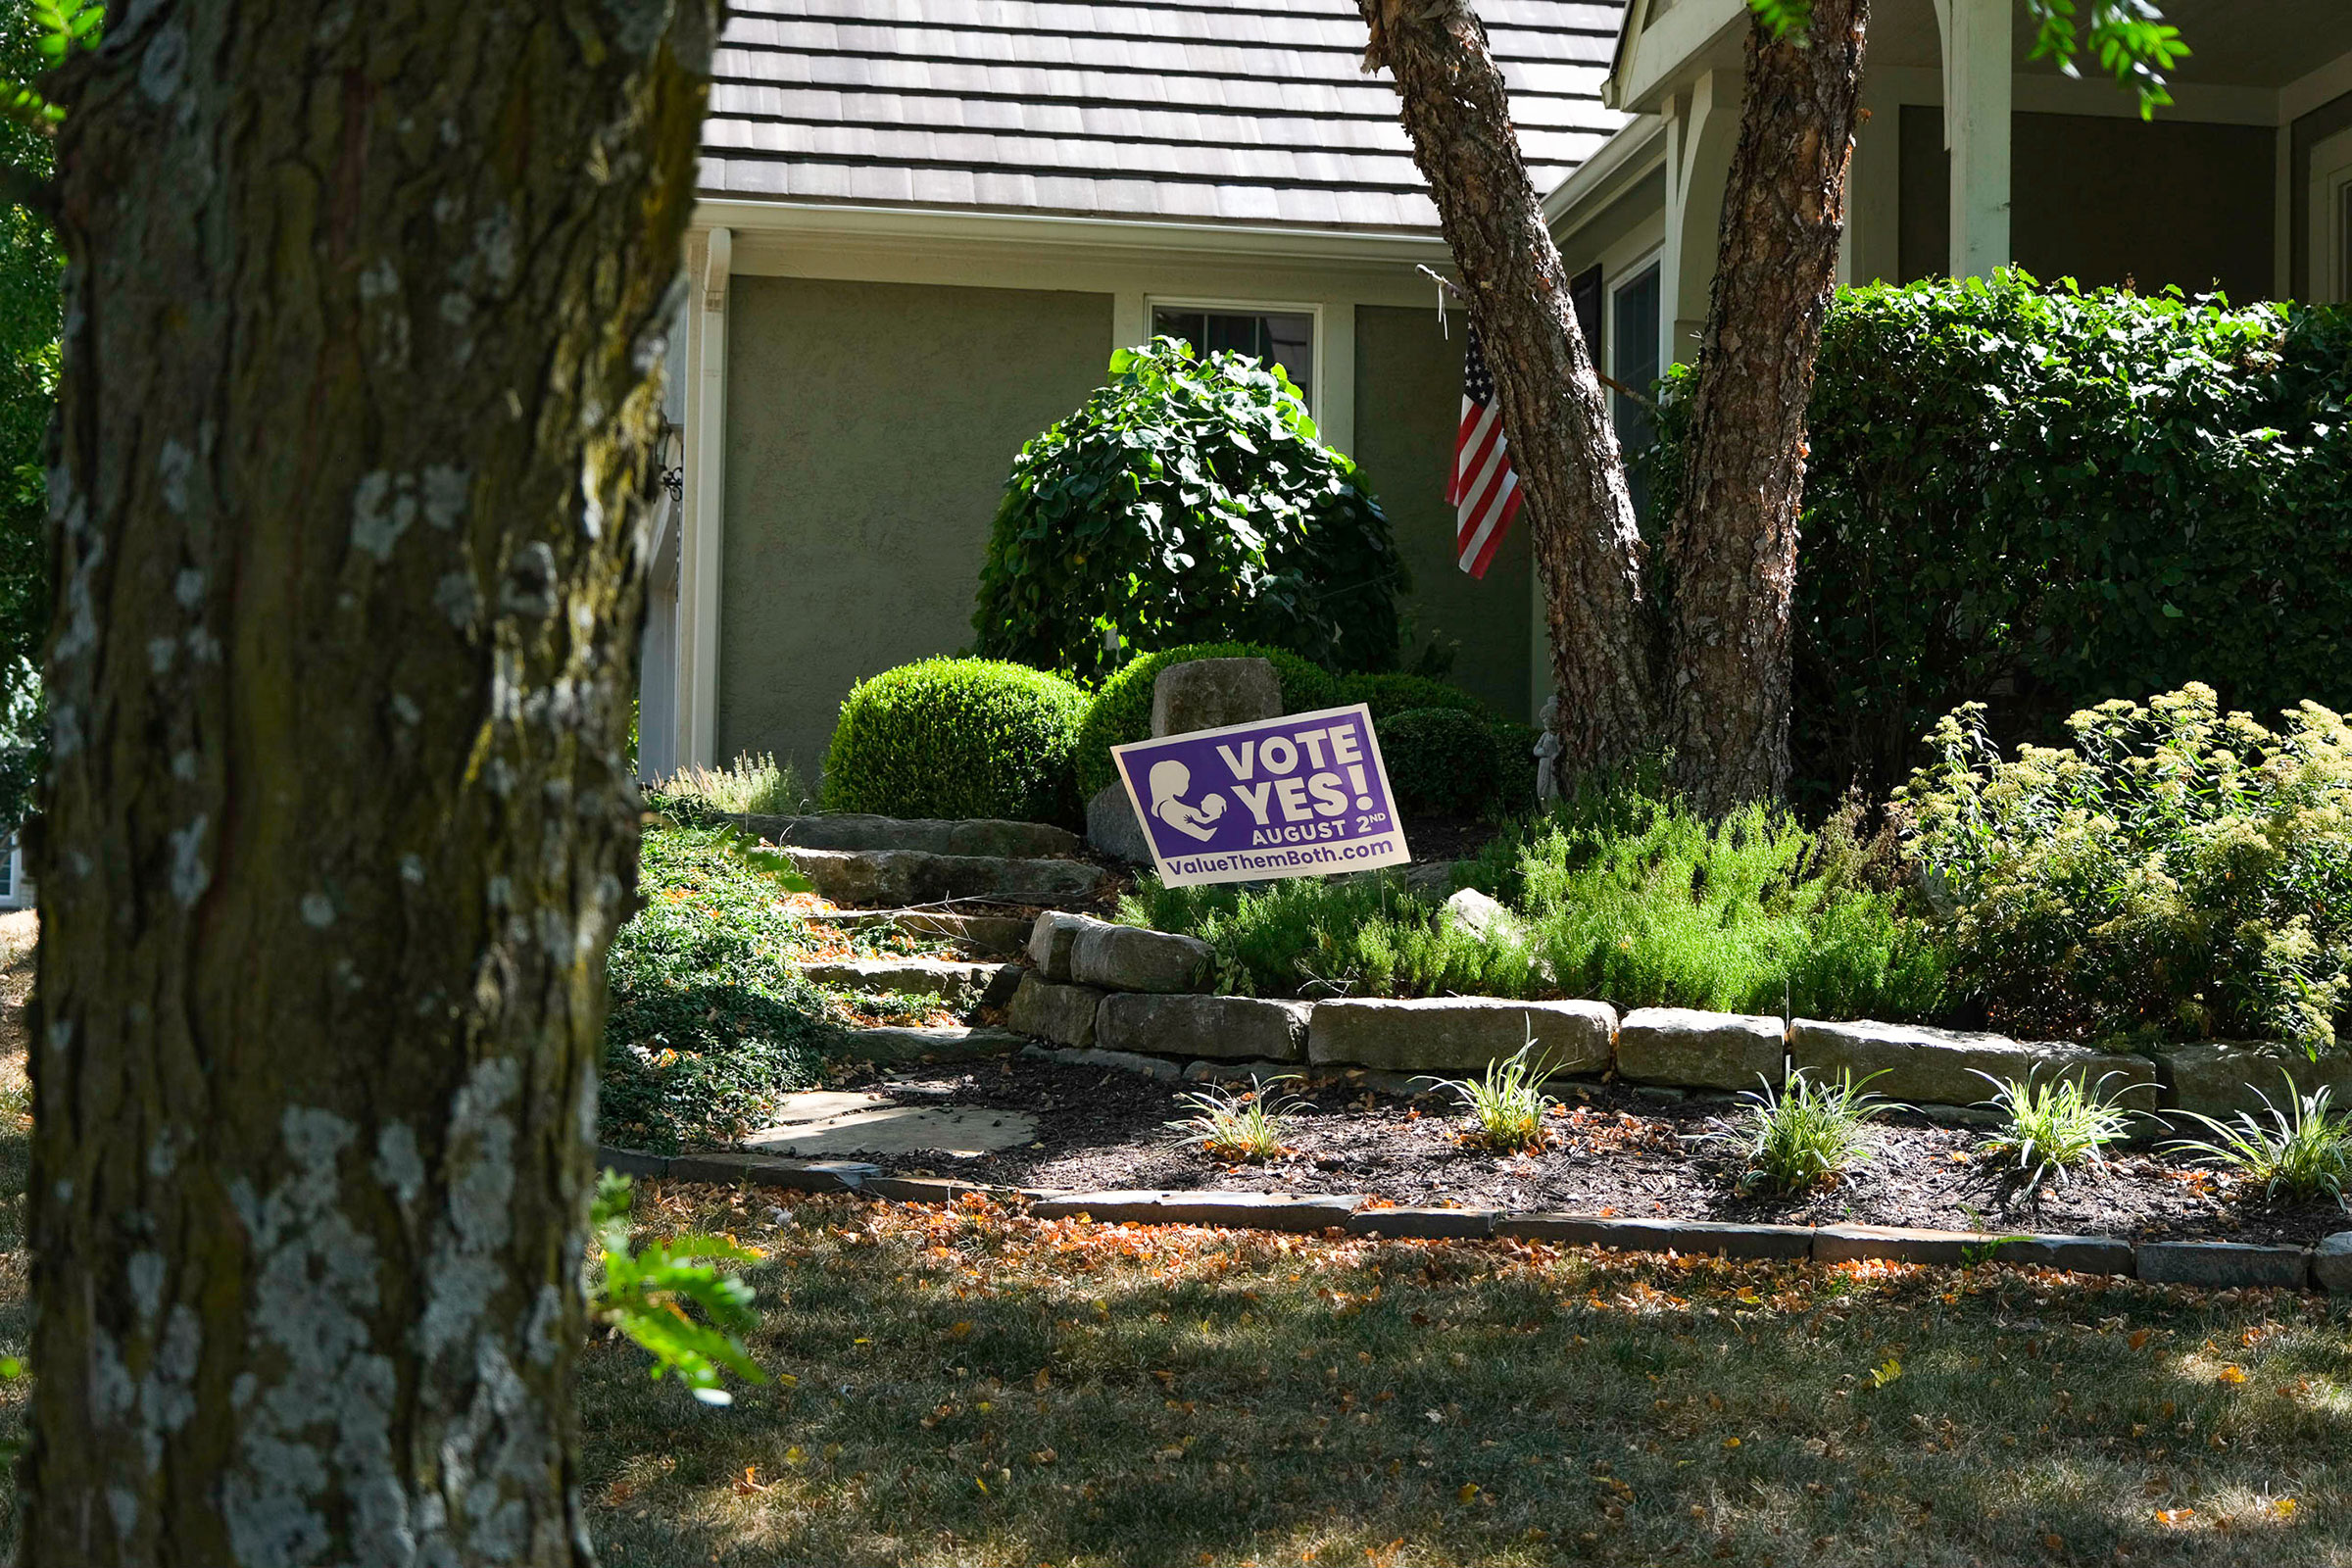 A 'Value Them Both' sign is displayed in yard of a home in Olathe, Kansas on July 23, 2022. Arin Yoon for TIME.